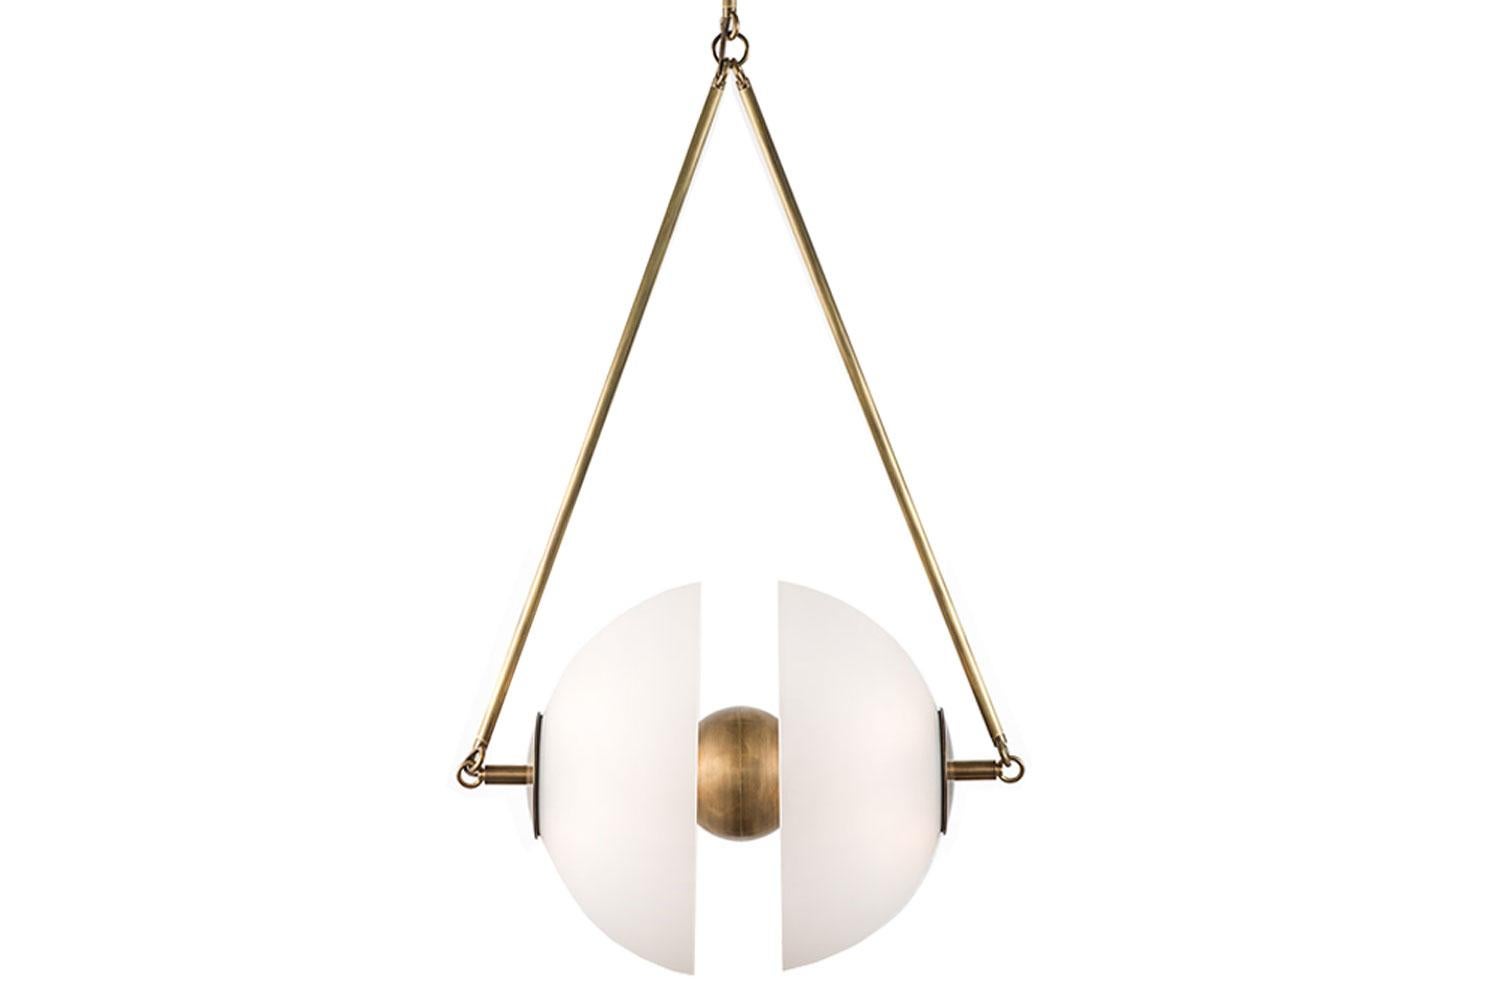 Synapse Small by Apparatus

Inspired by the mechanics of neural synapses, the aged brass orb floats in transit between two hand-molded glass domes.

This lighting is in excellent showroom condition. Used in showroom setting. Barely imperceptible